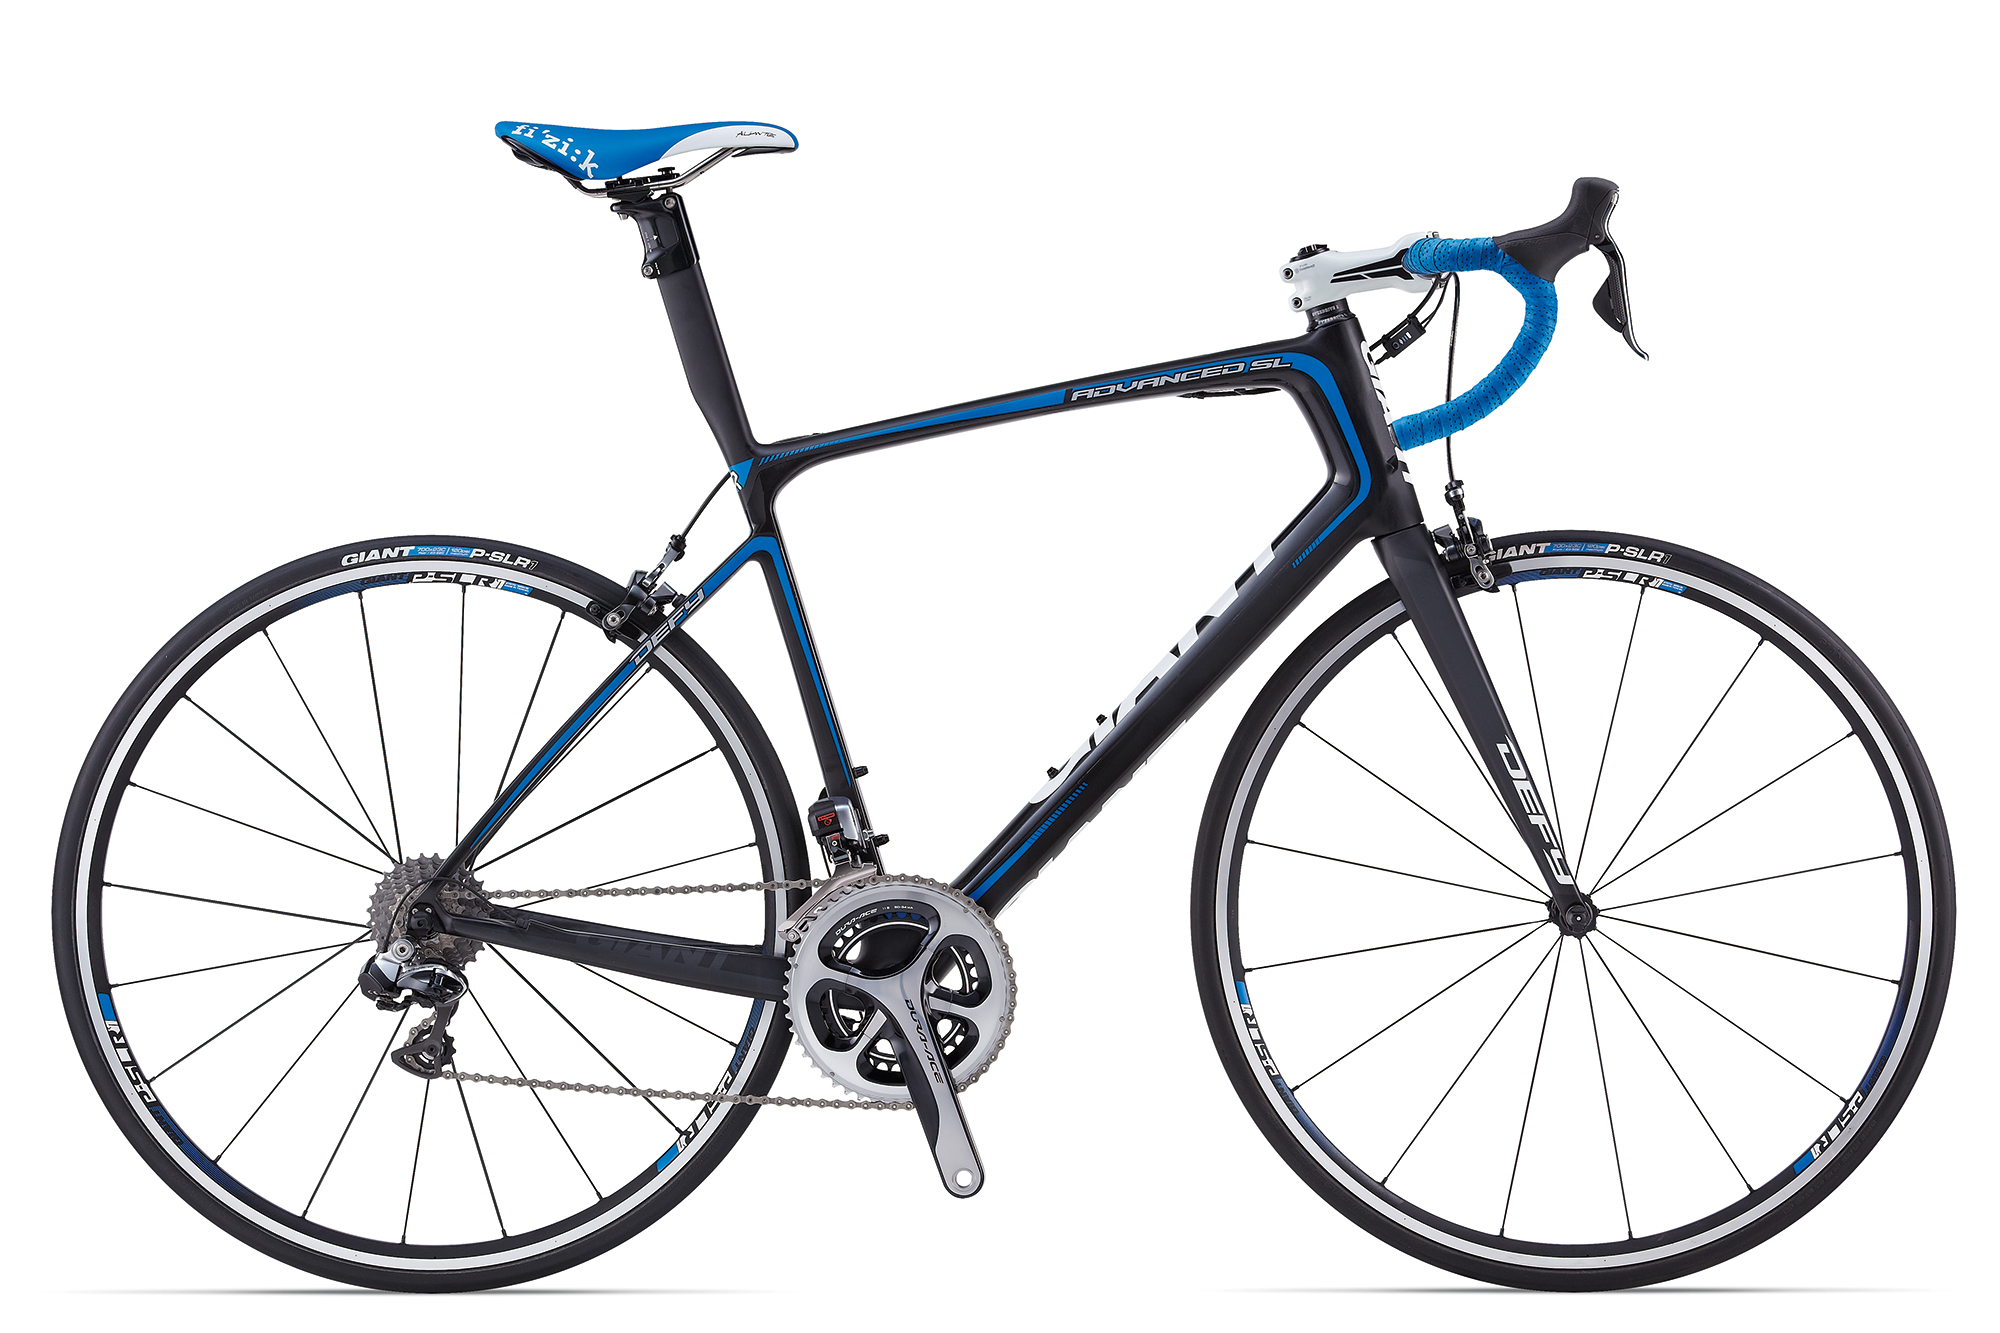 14 Giant Defy Advanced Sl 0 Bicycle Details Bicyclebluebook Com